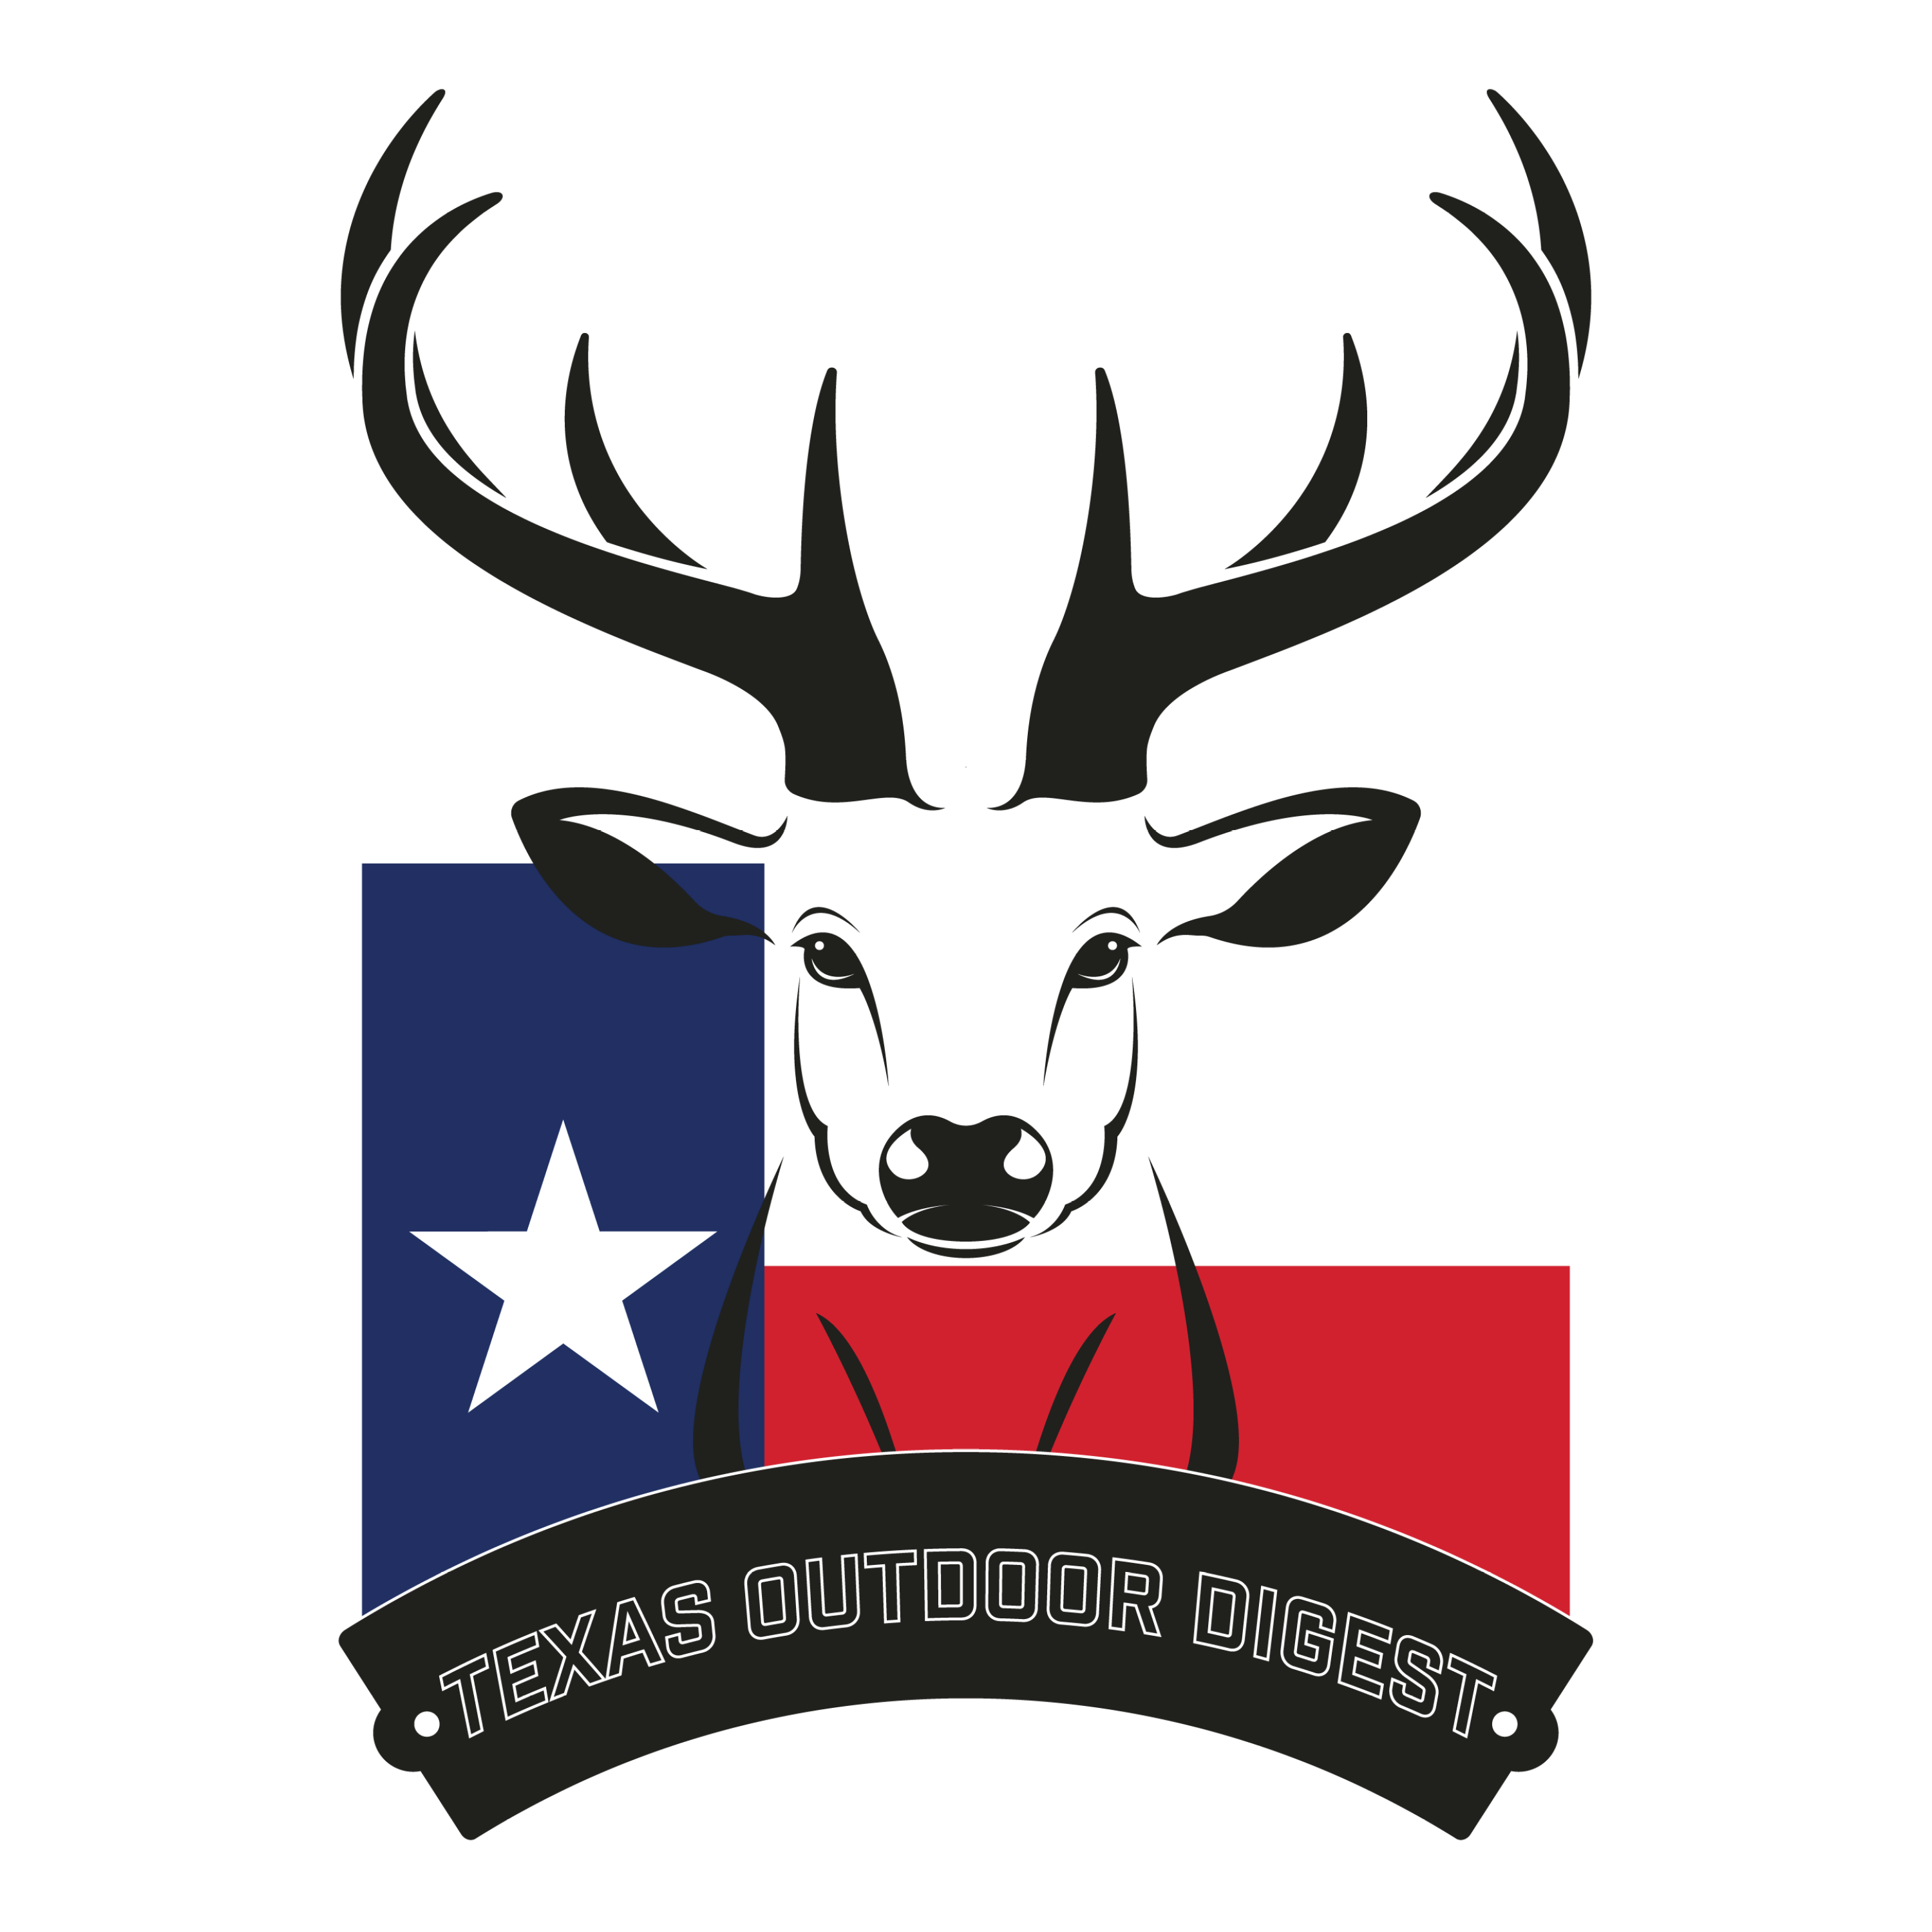 Texas deer forecast looks excellent and Lake Texoma still a striper hot spot